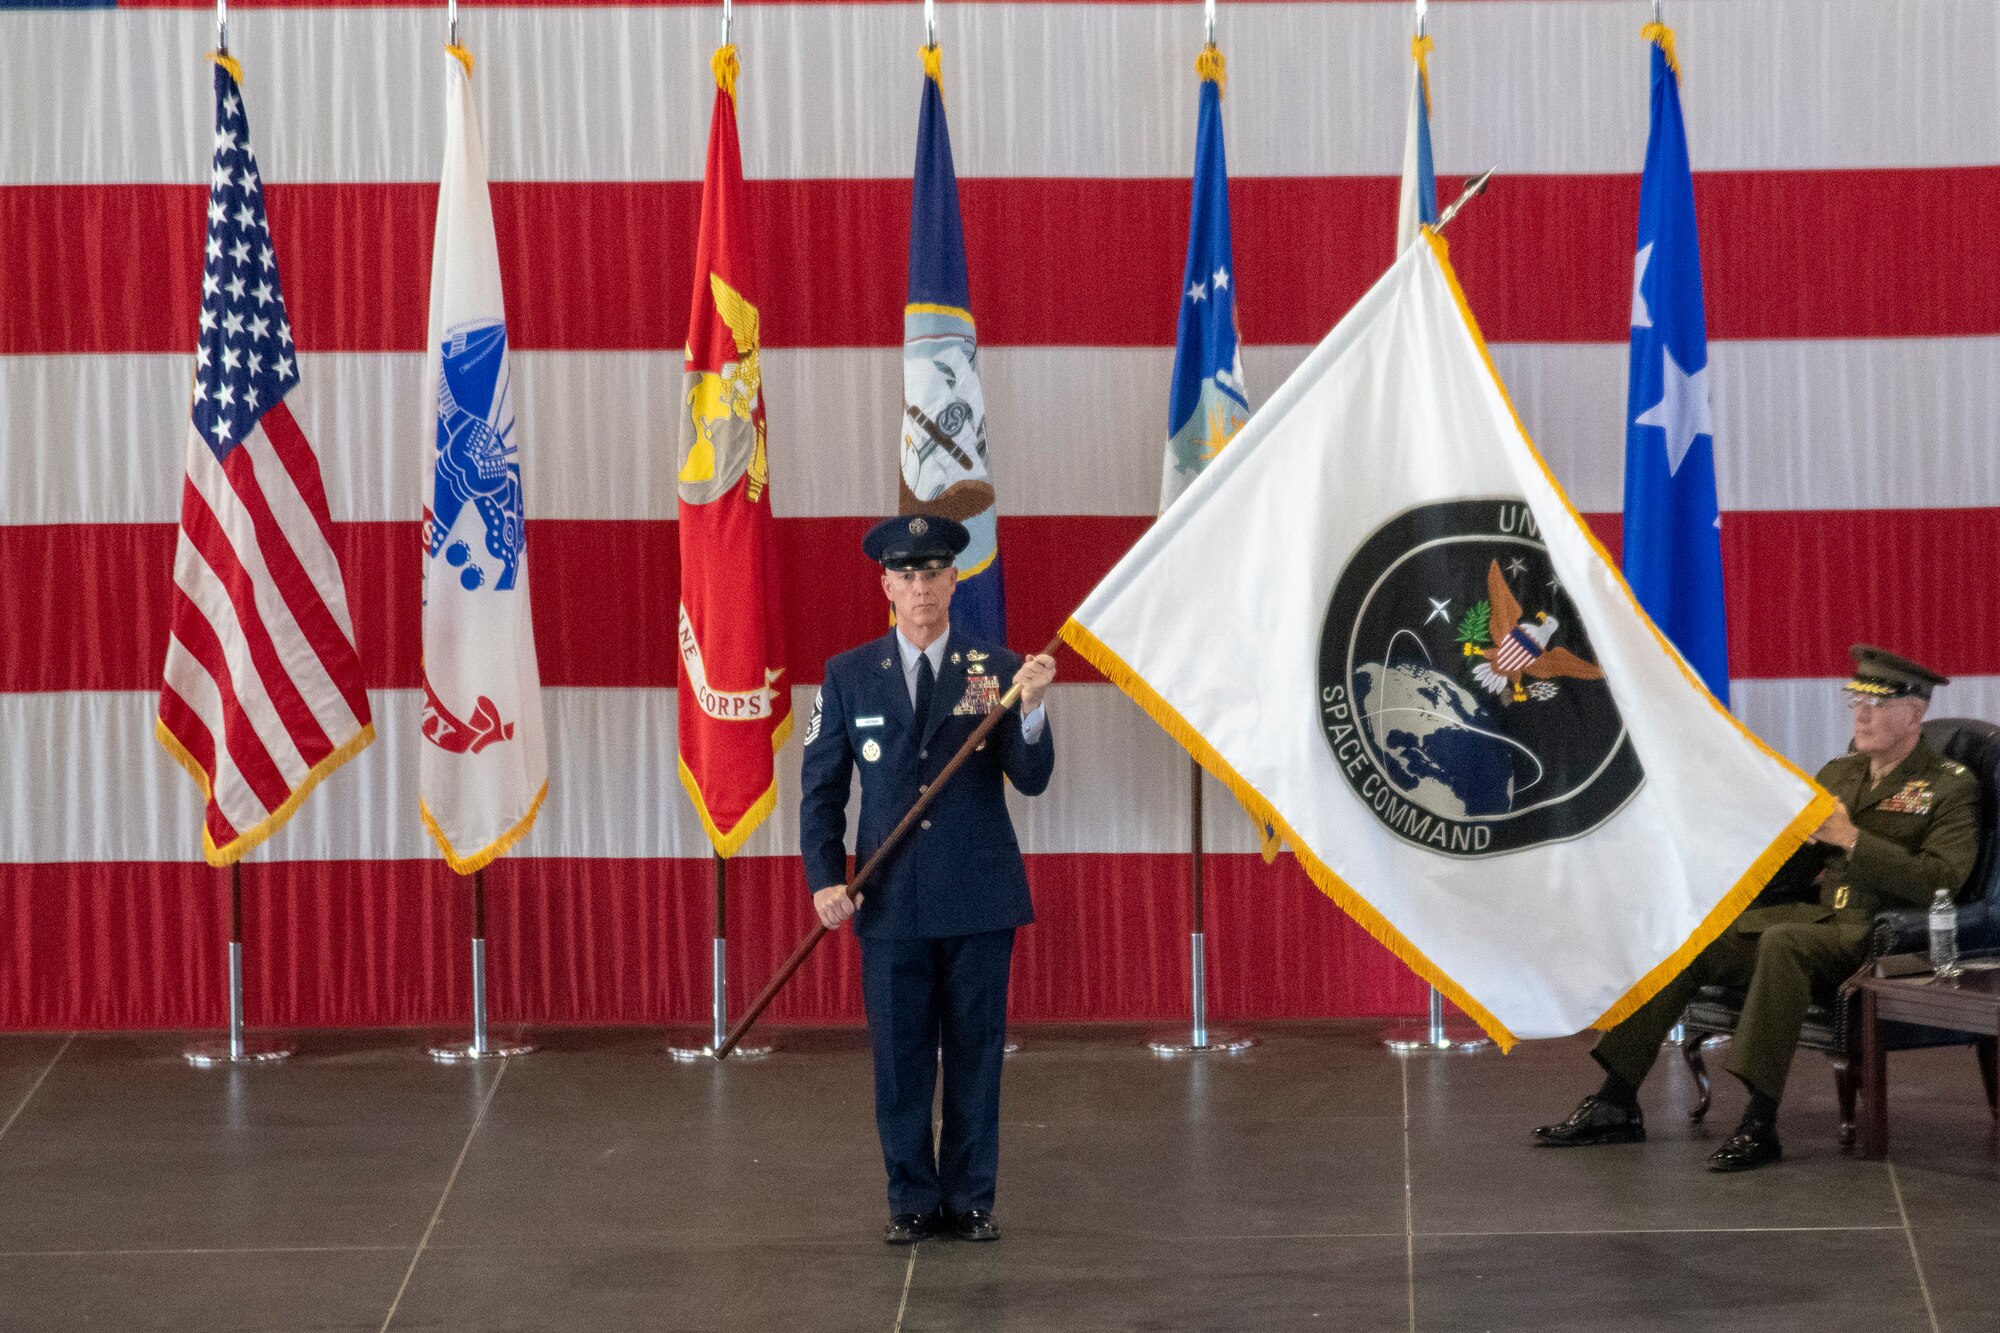 Air Force Chief Master Sgt. Roger A. Towberman, command chief, U.S. Space Command and Air Force Space Command, presents the colors of USSPACECOM during the recognition and establisment ceremony at Peterson Air Force Base, Colorado Sept. 9, 2019.